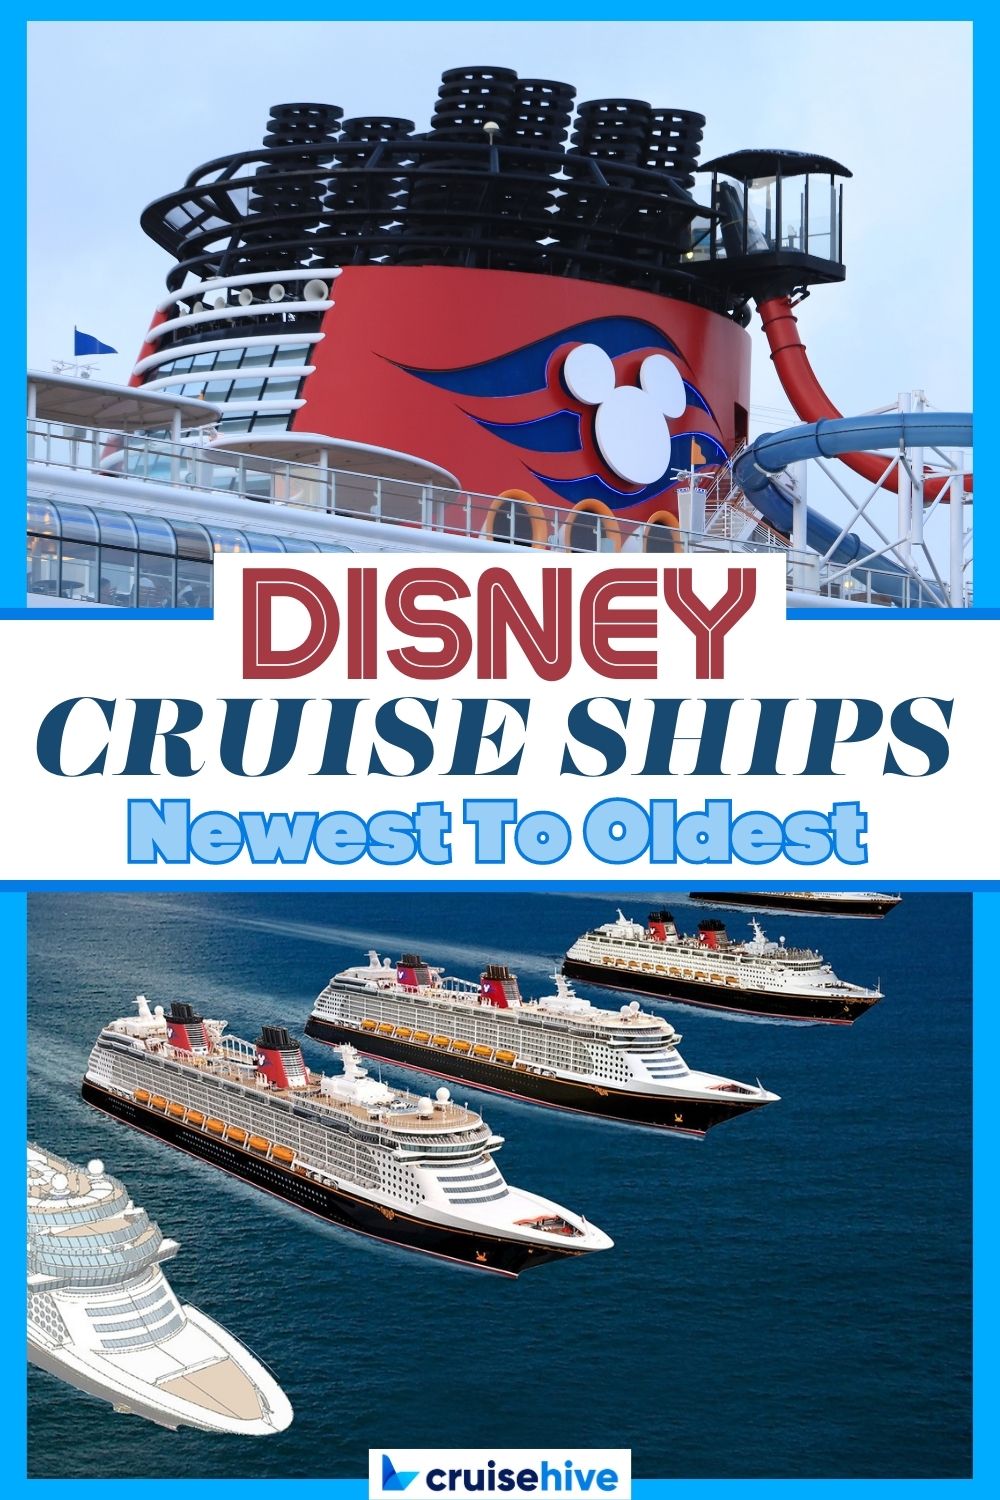 Disney Cruise Ships: Newest to Oldest